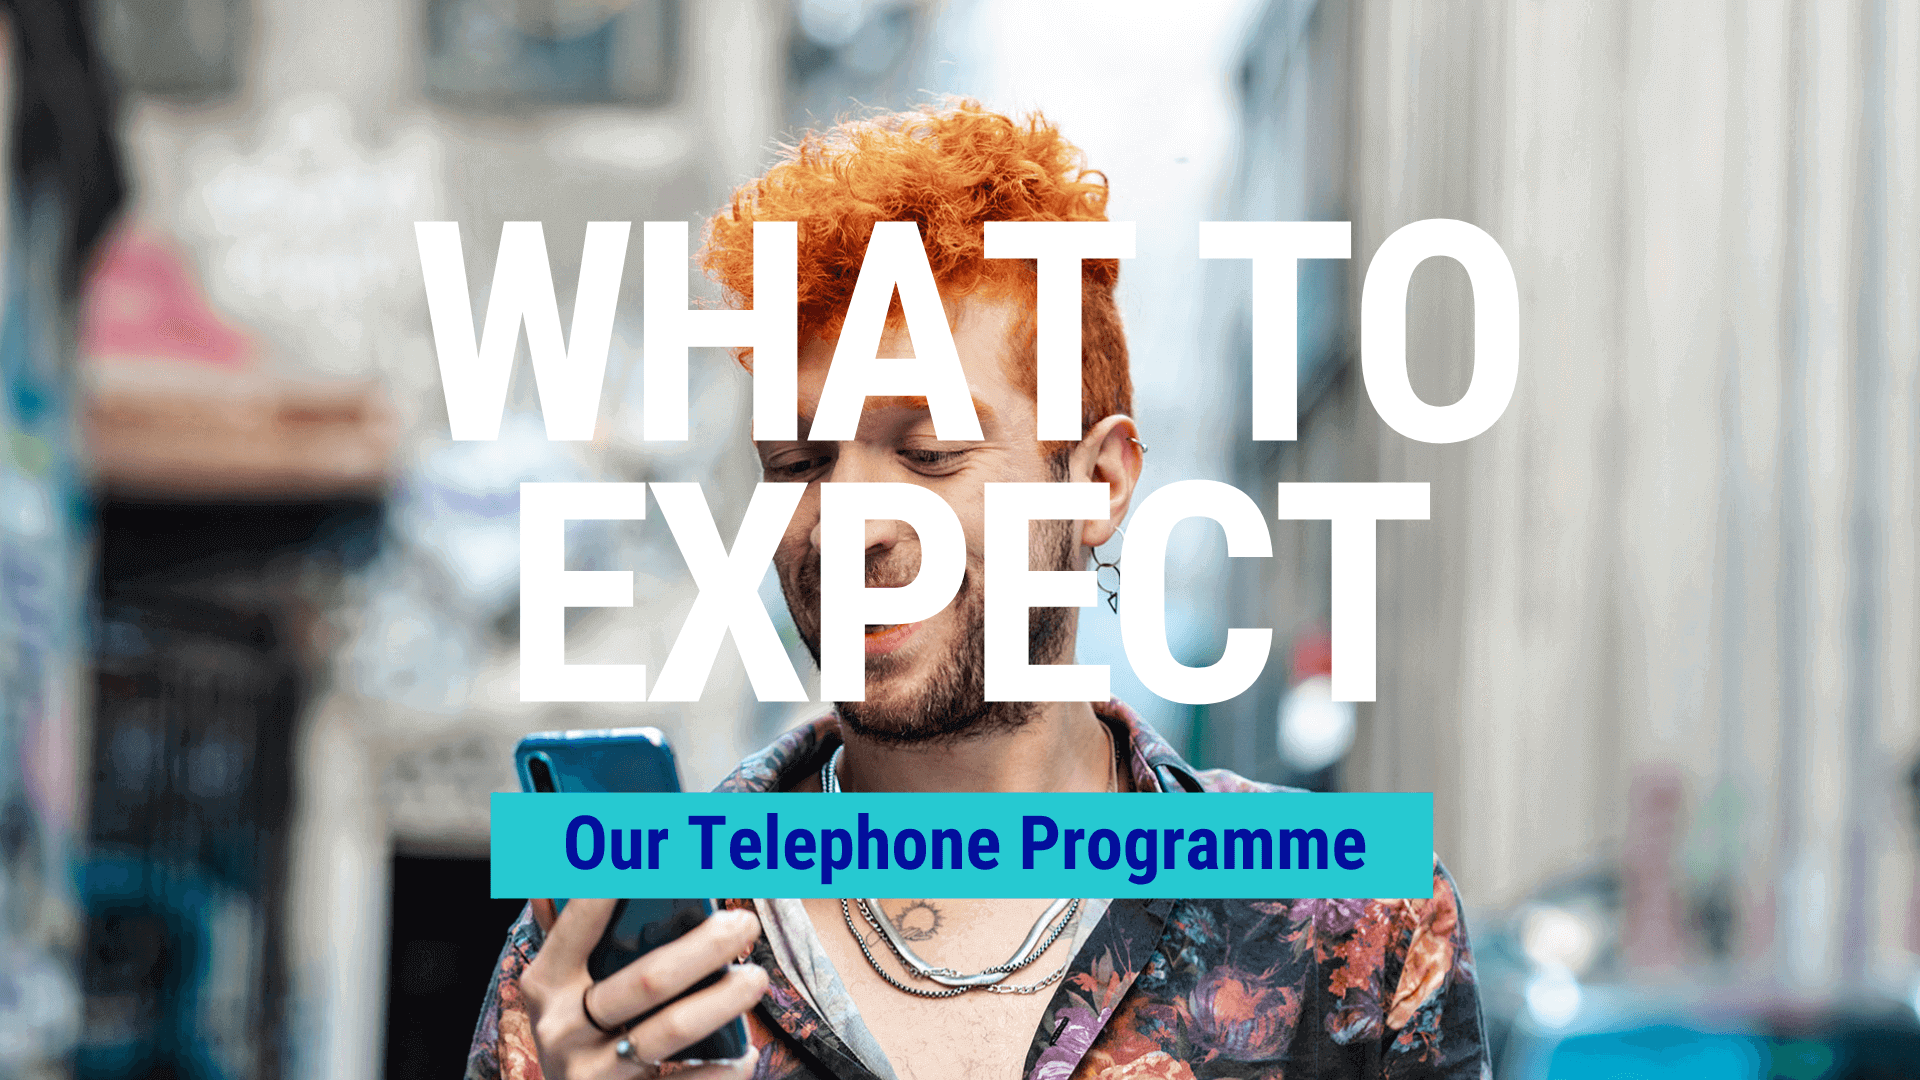 Video cover - telephone programme